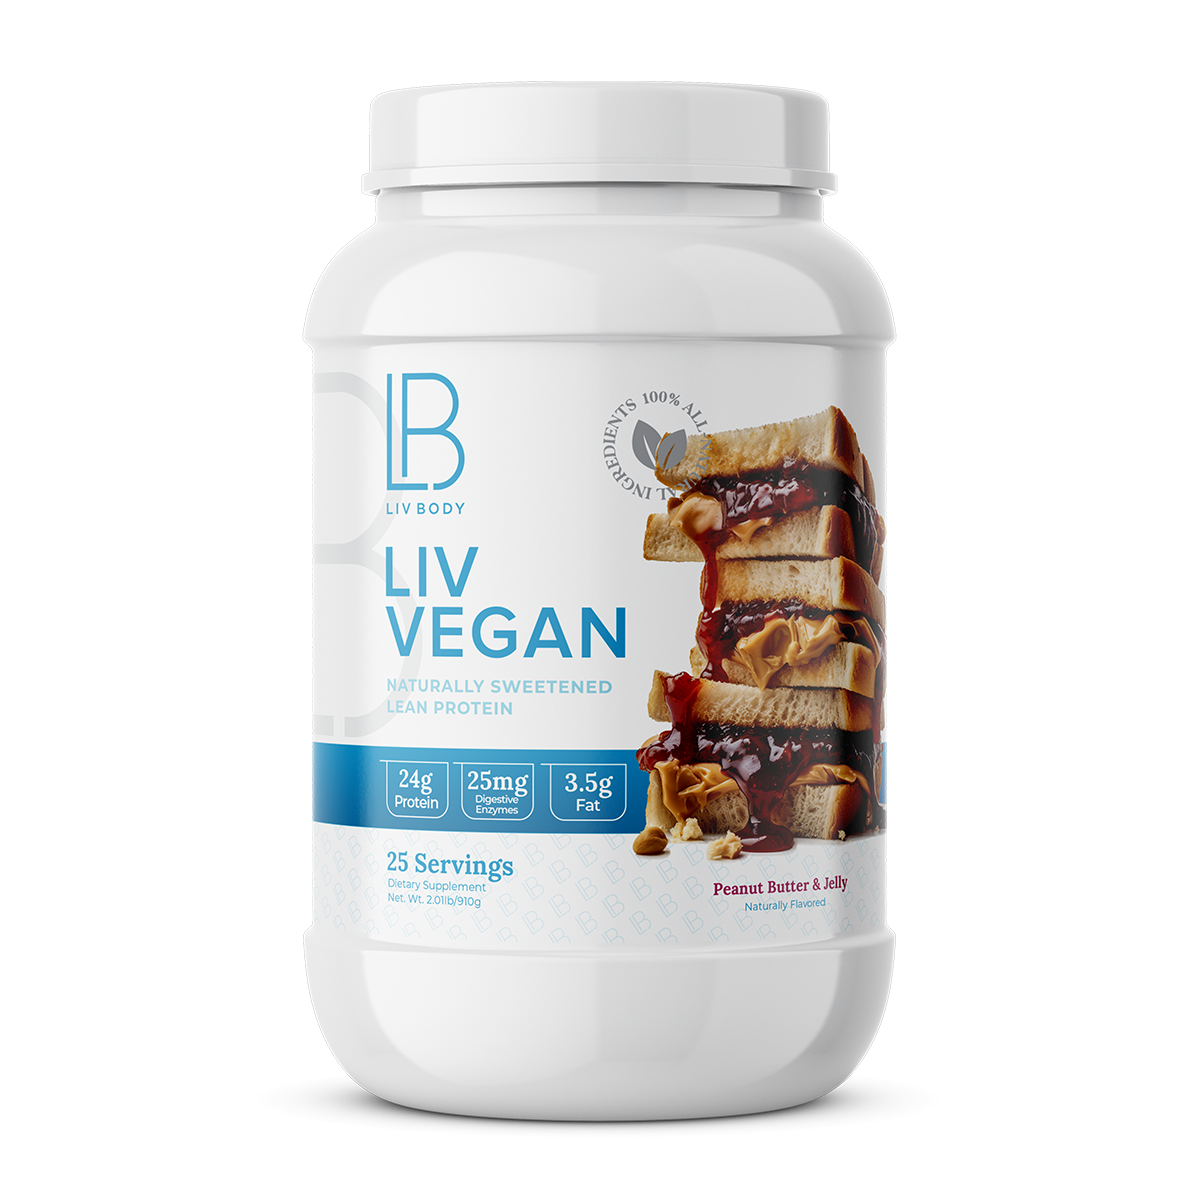 Image of LIV Vegan - Lean Protein, good for building muscle tissue and helping muscle recovery while on a vegan diet.